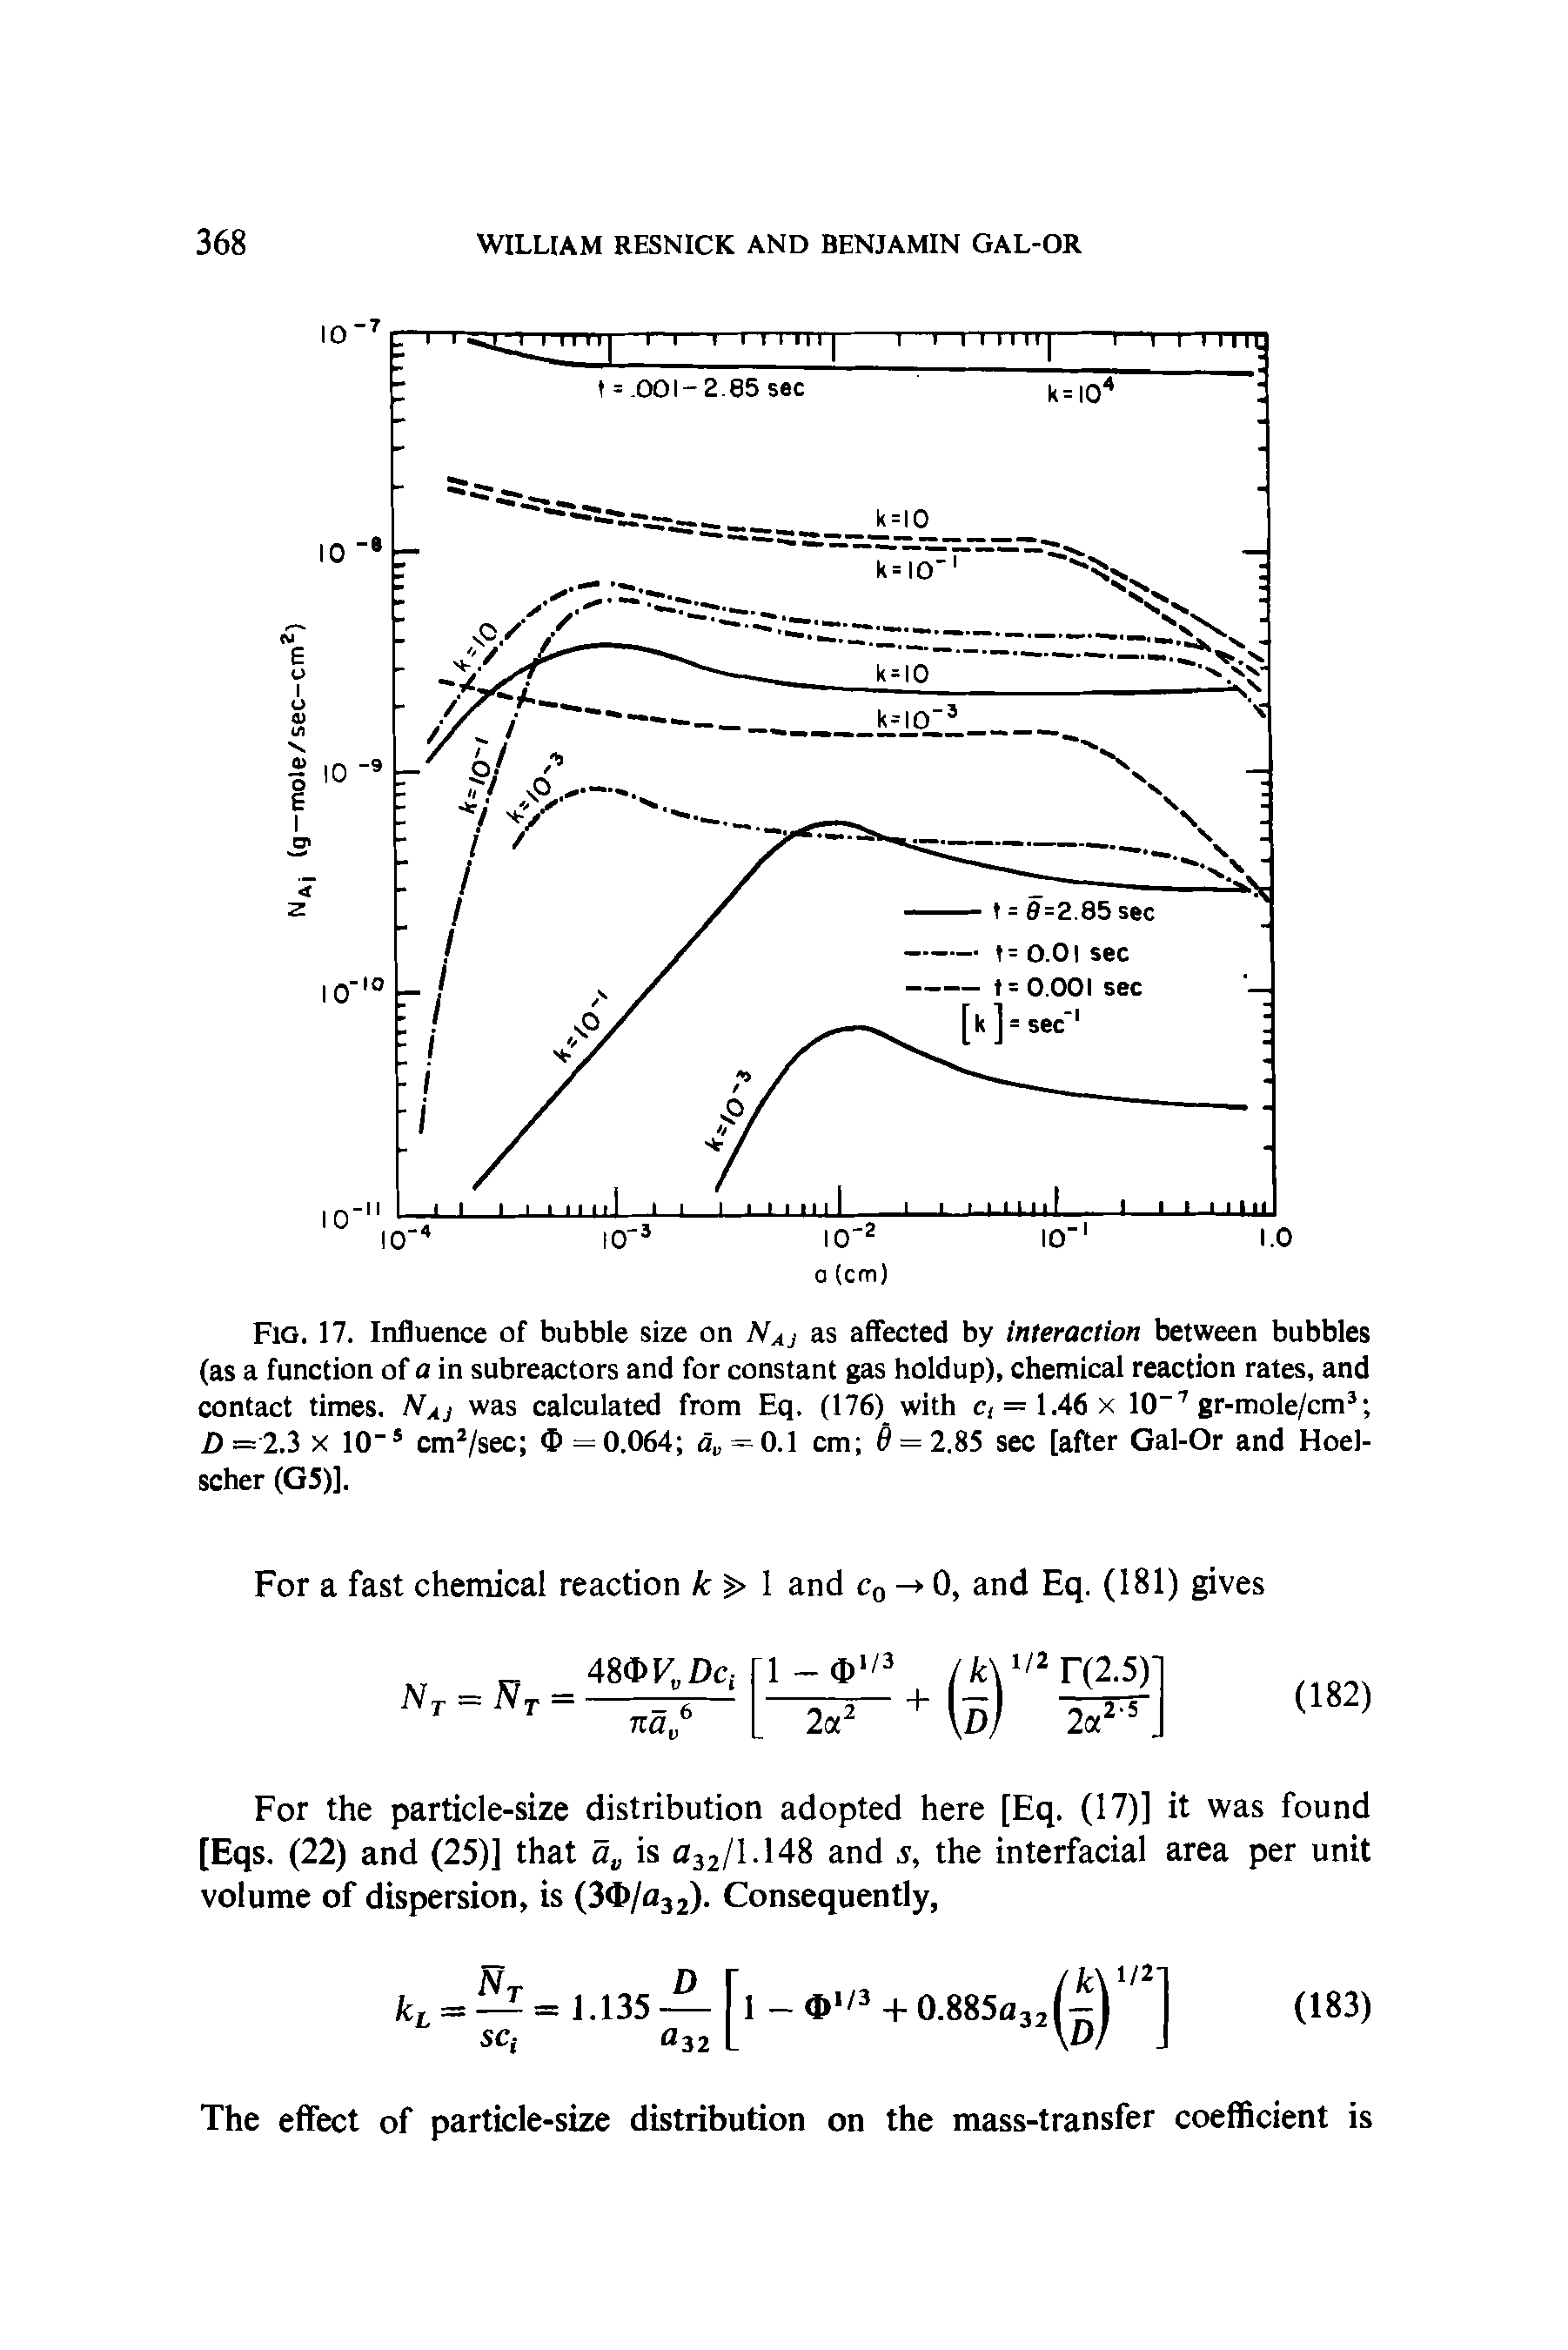 Fig. 17. Influence of bubble size on NAj as affected by interaction between bubbles (as a function of a in subreactors and for constant gas holdup), chemical reaction rates, and contact times. NAJ was calculated from Eq. (176) with c, = 1.46 x 10-7 gr-mole/cm3 D= 2.3 x 10"5 cm2/sec G> =0.064 d = 0.1 cm 0 = 2.85 sec [after Gal-Or and Hoel-scher (G5)].